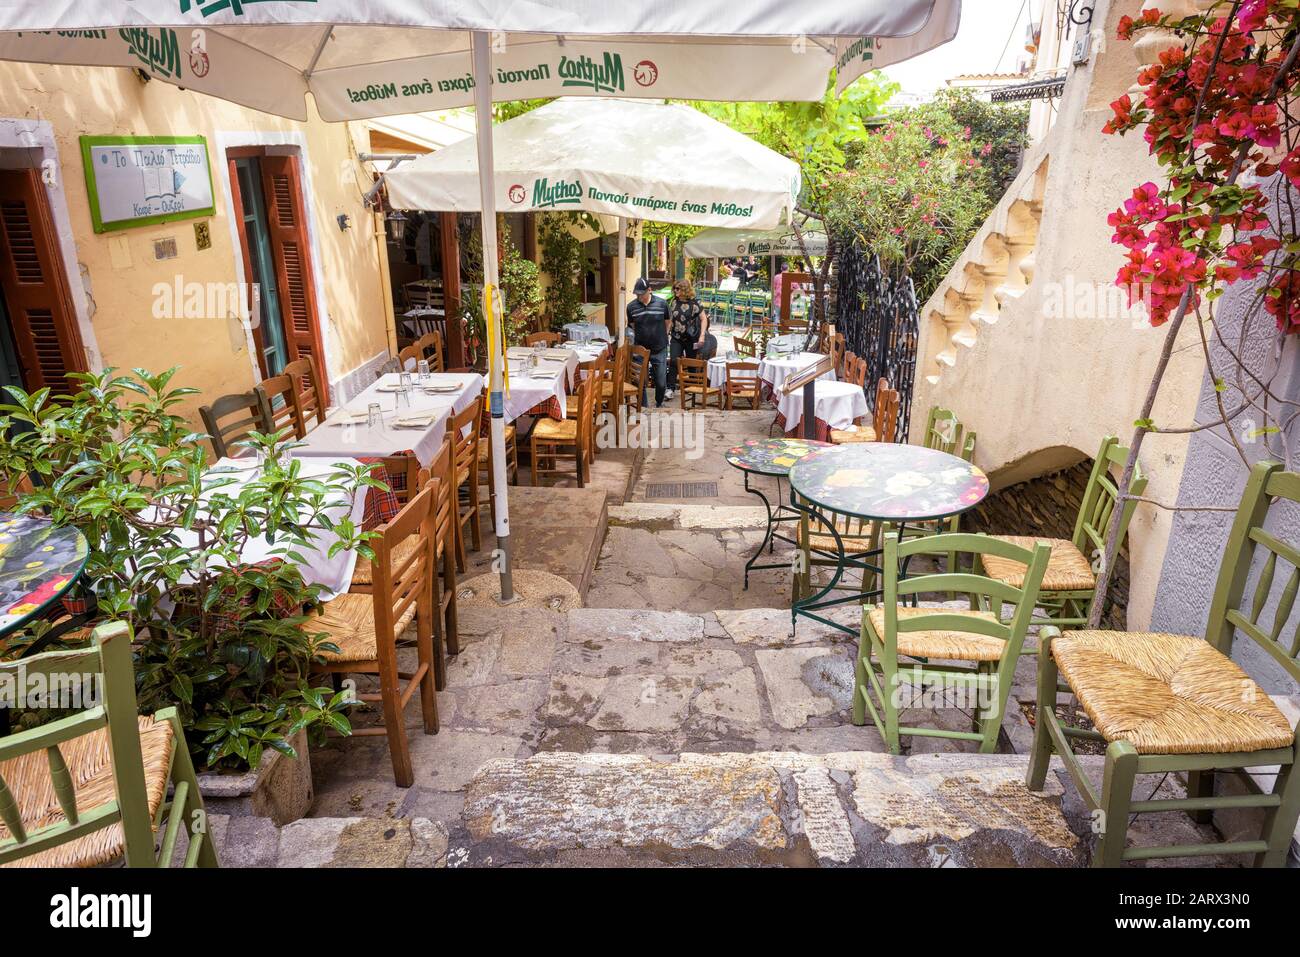 Athens - May 6, 2018: Street cafe with flowers and plants in Plaka district, Athens, Greece. Plaka is one of the main tourist attractions of Athens. Stock Photo